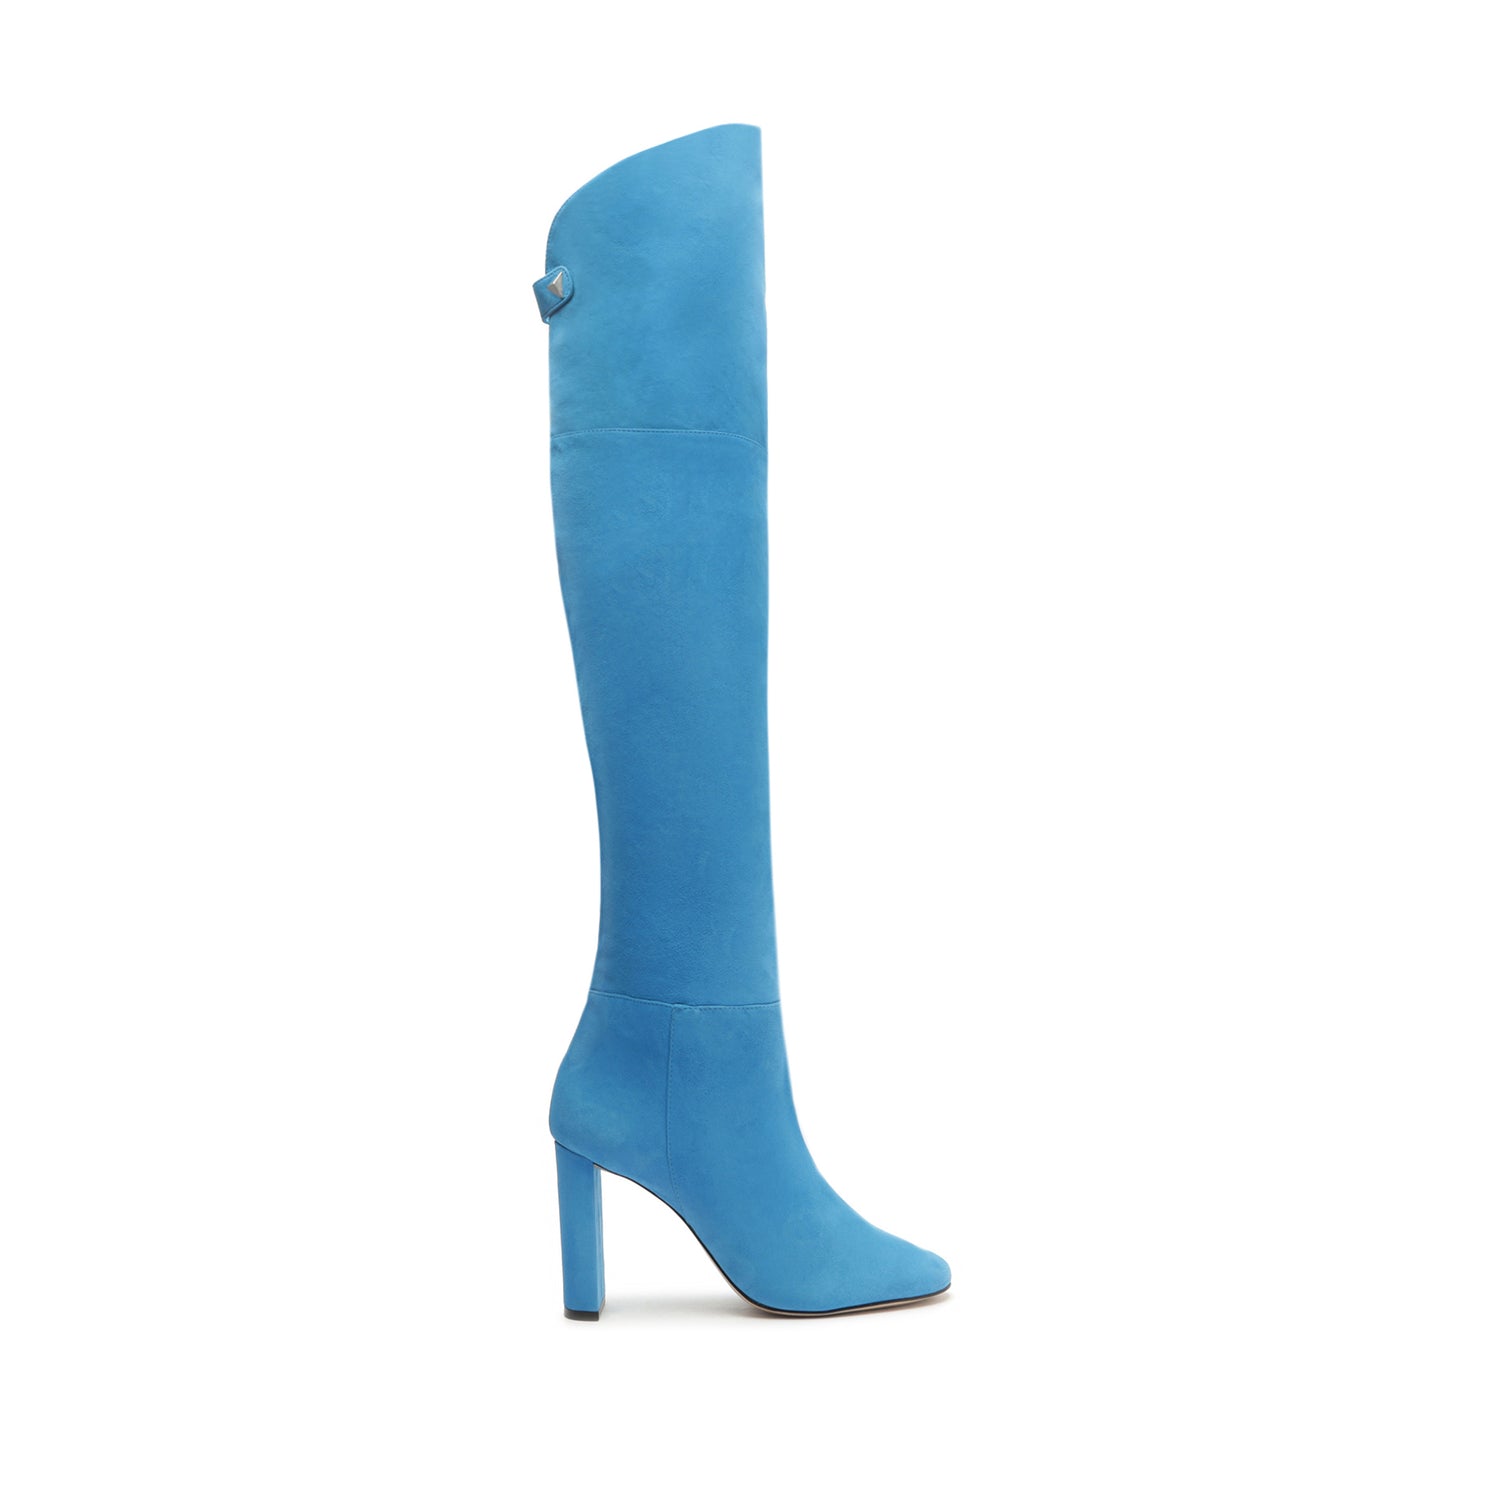 Austine Casual Suede Boot Boots Open Stock 5 Citric Blue Suede - Schutz Shoes